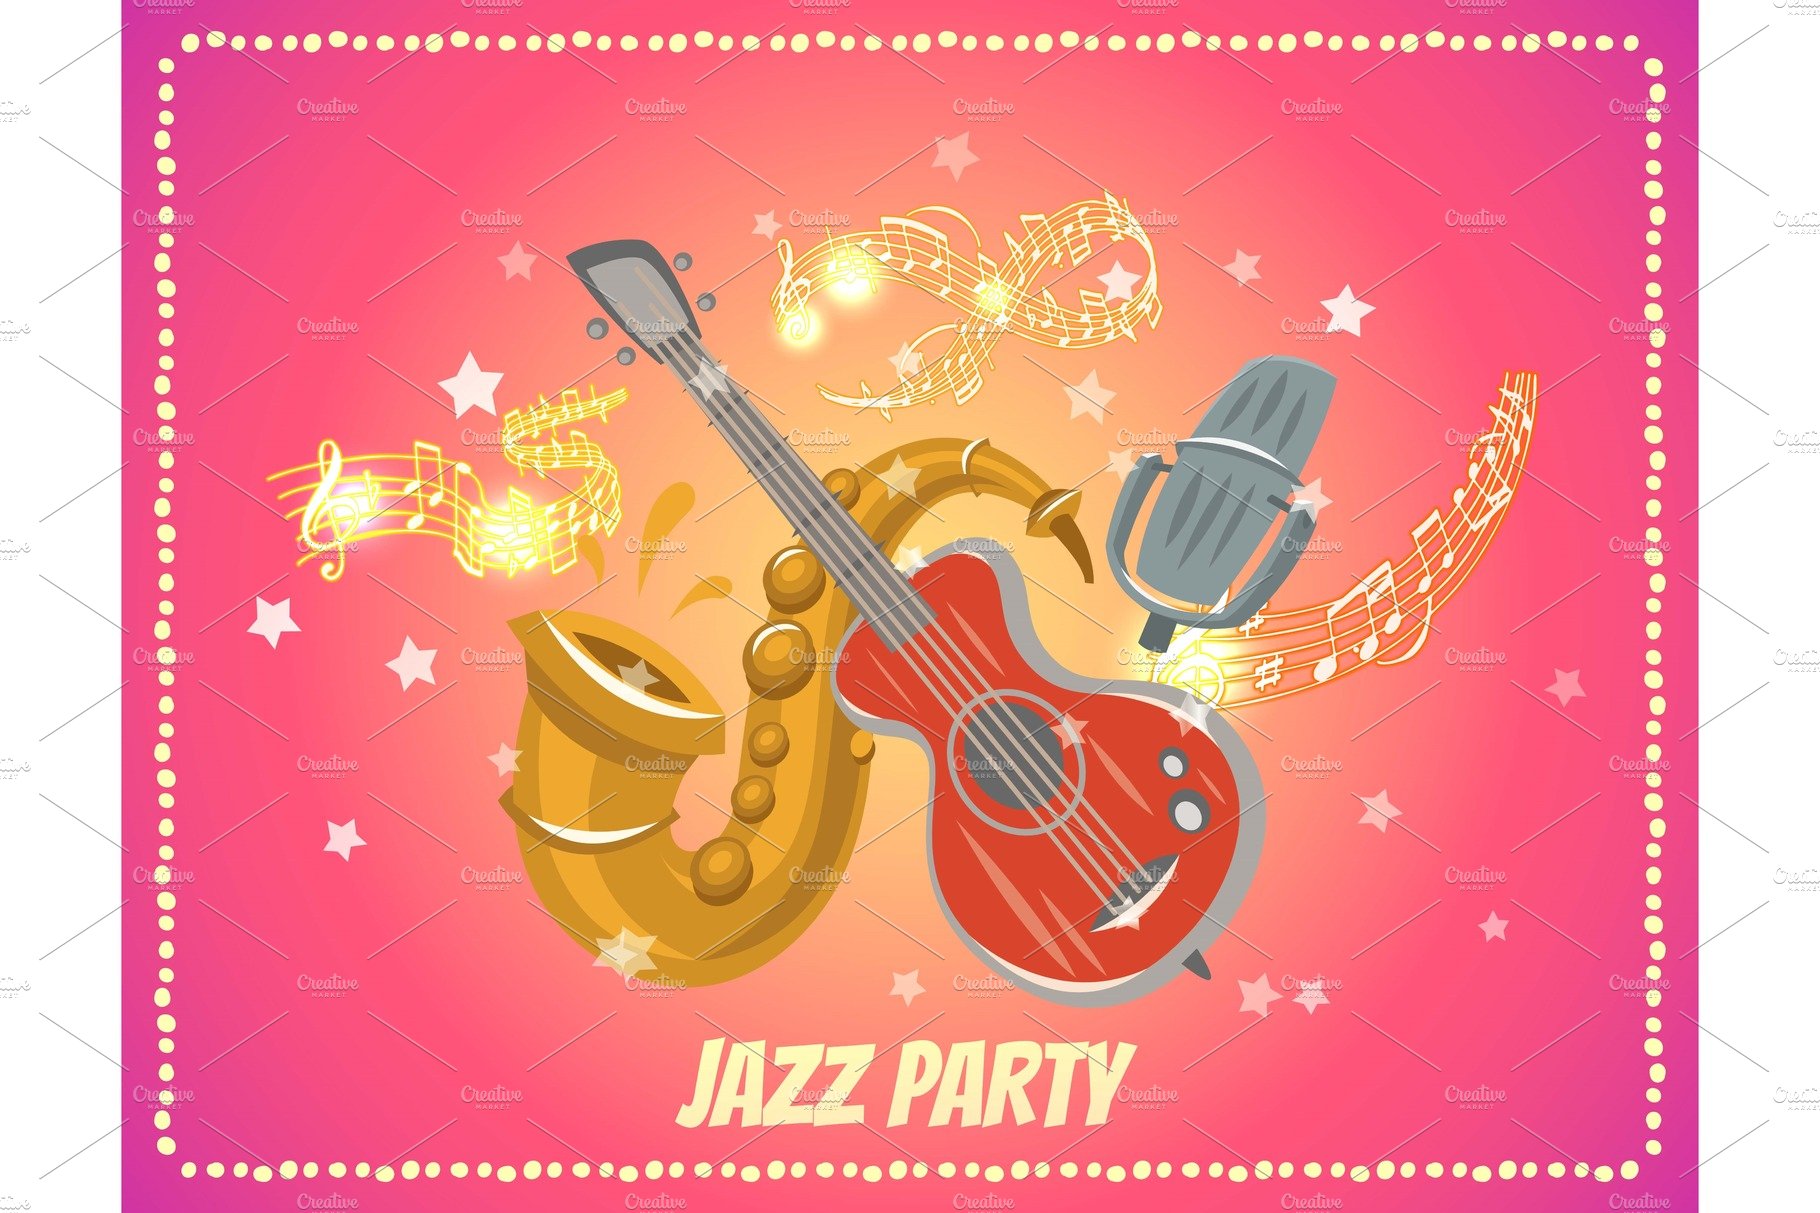 Jazz and blues music party or cover image.